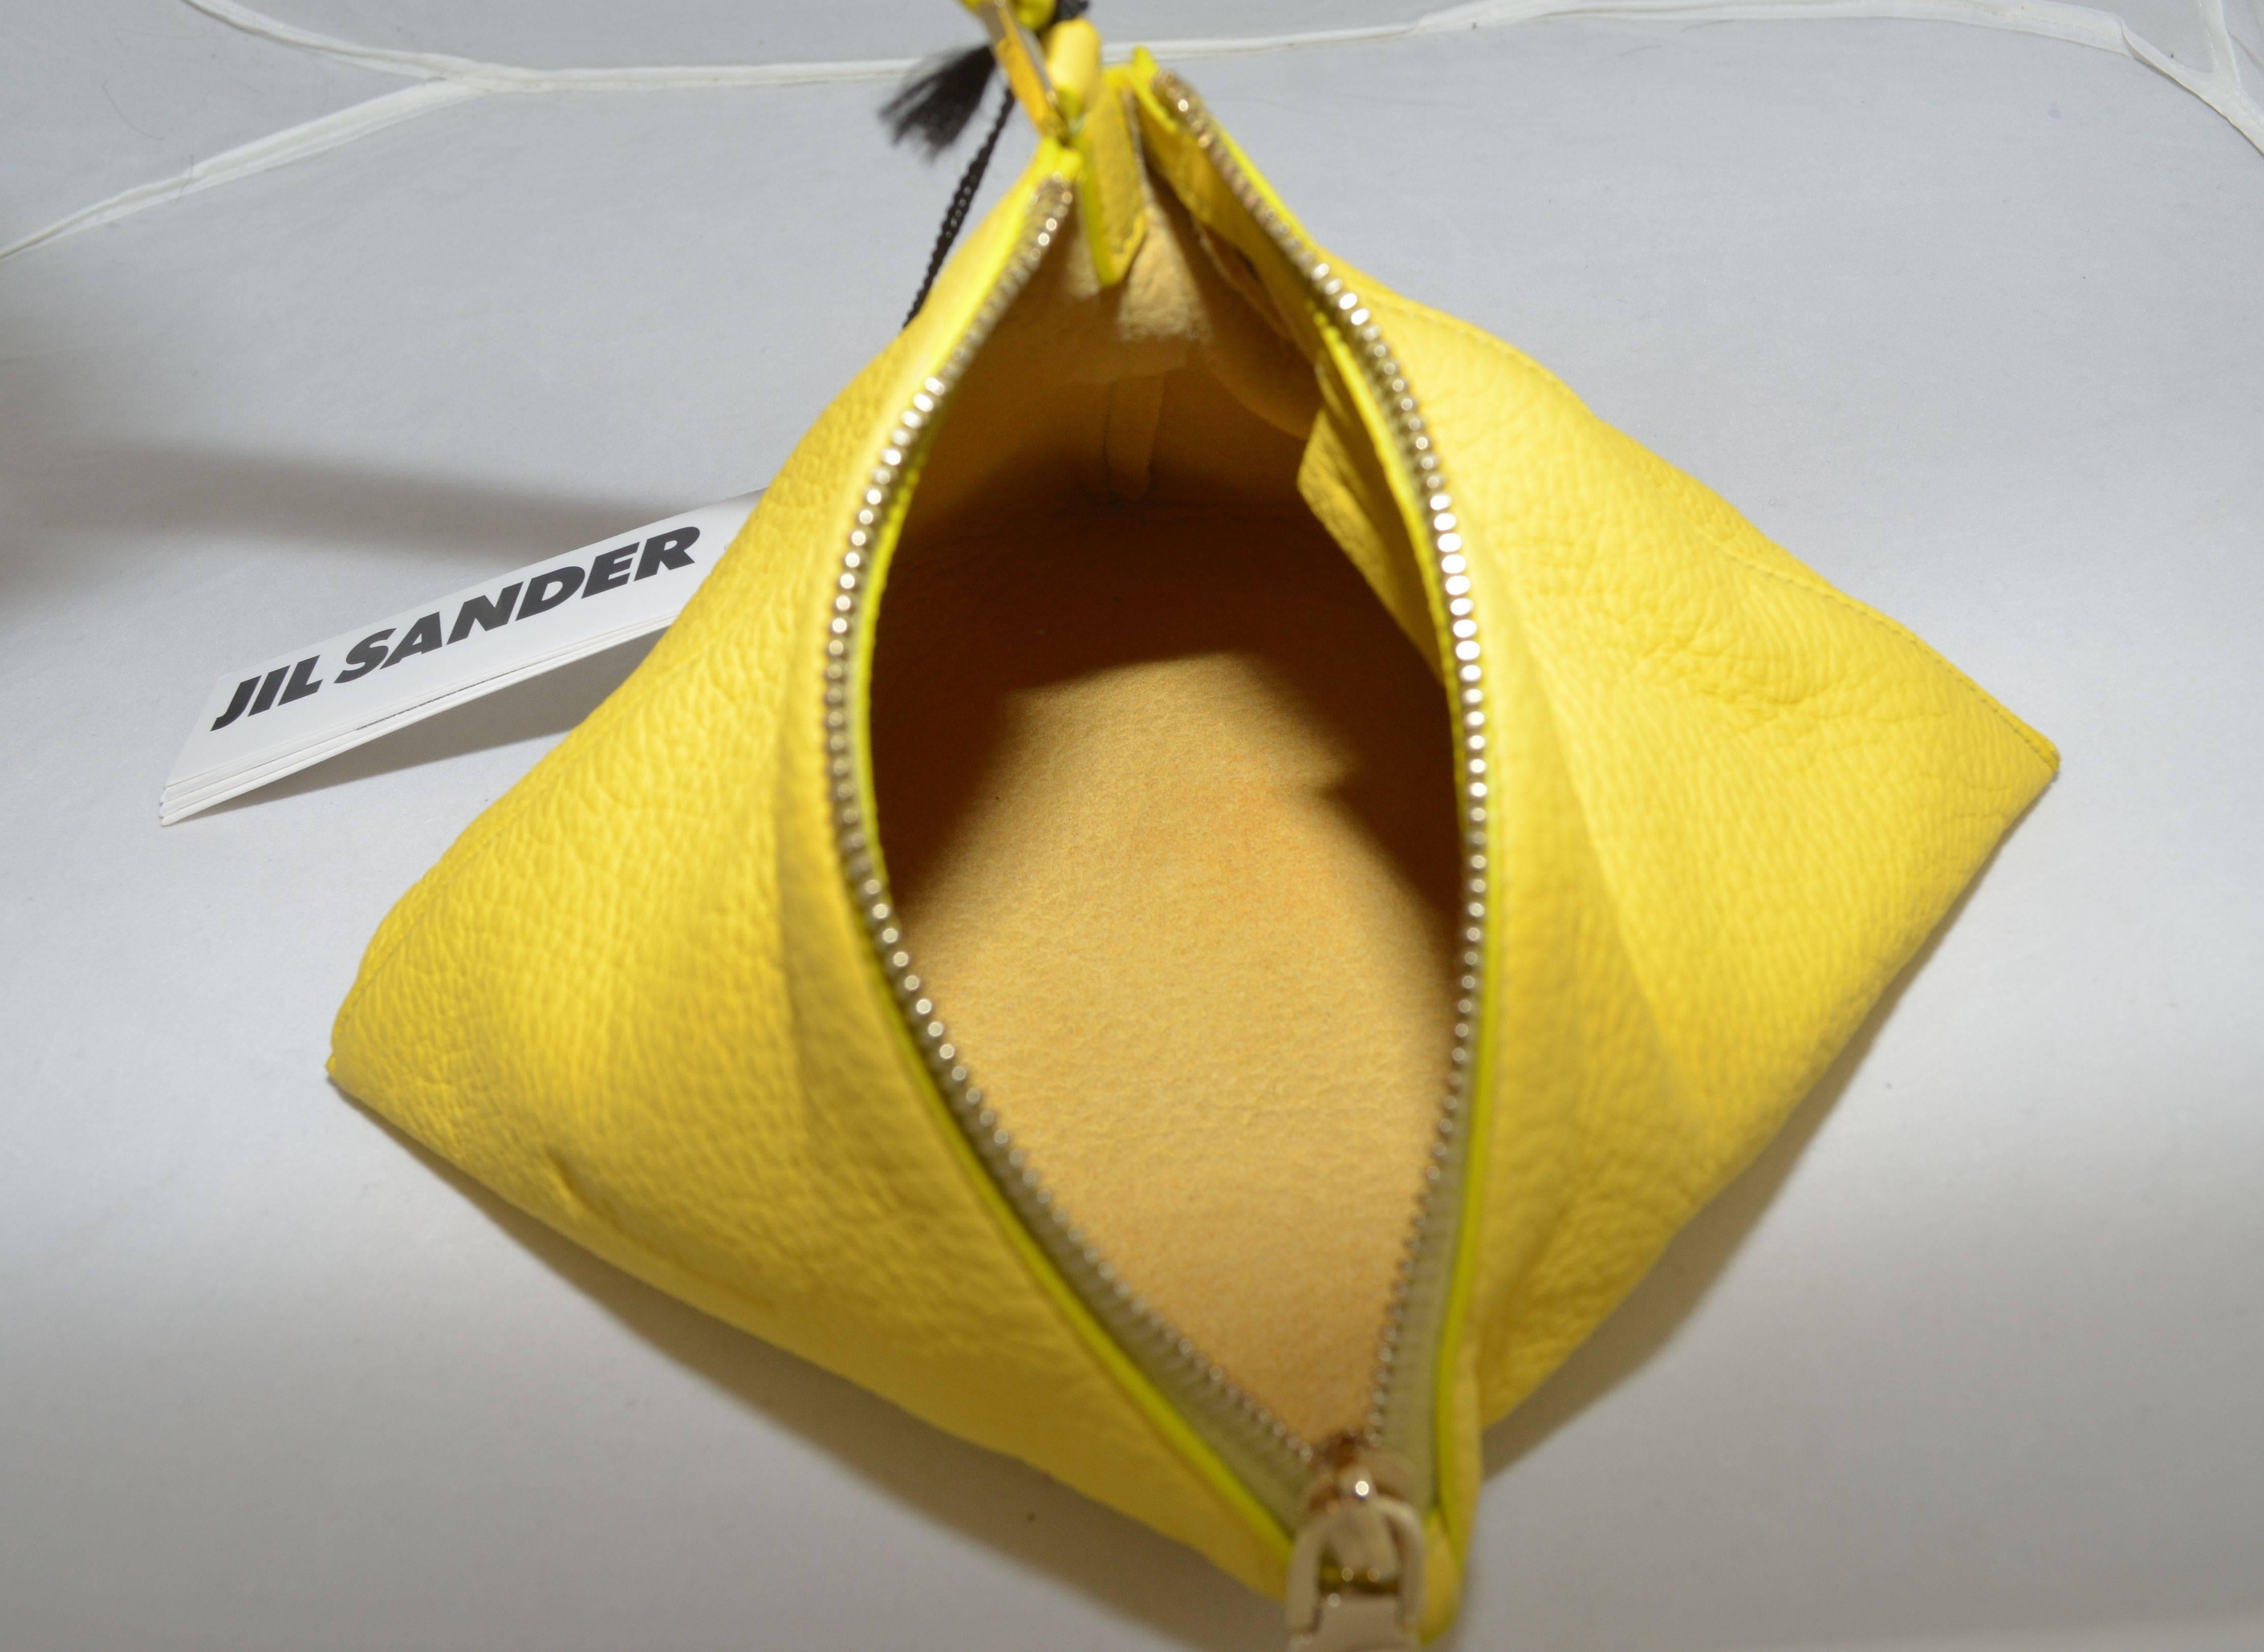 Jil Sander Leather Pyramid Wristlet Clutch Bag is made with genuine leather, gold-tone hardware throughout with a zipper closure, and a flat leather handle. Includes original dust bag. Made in Italy.

Measurements: 
7''x 7'' x 7.5''